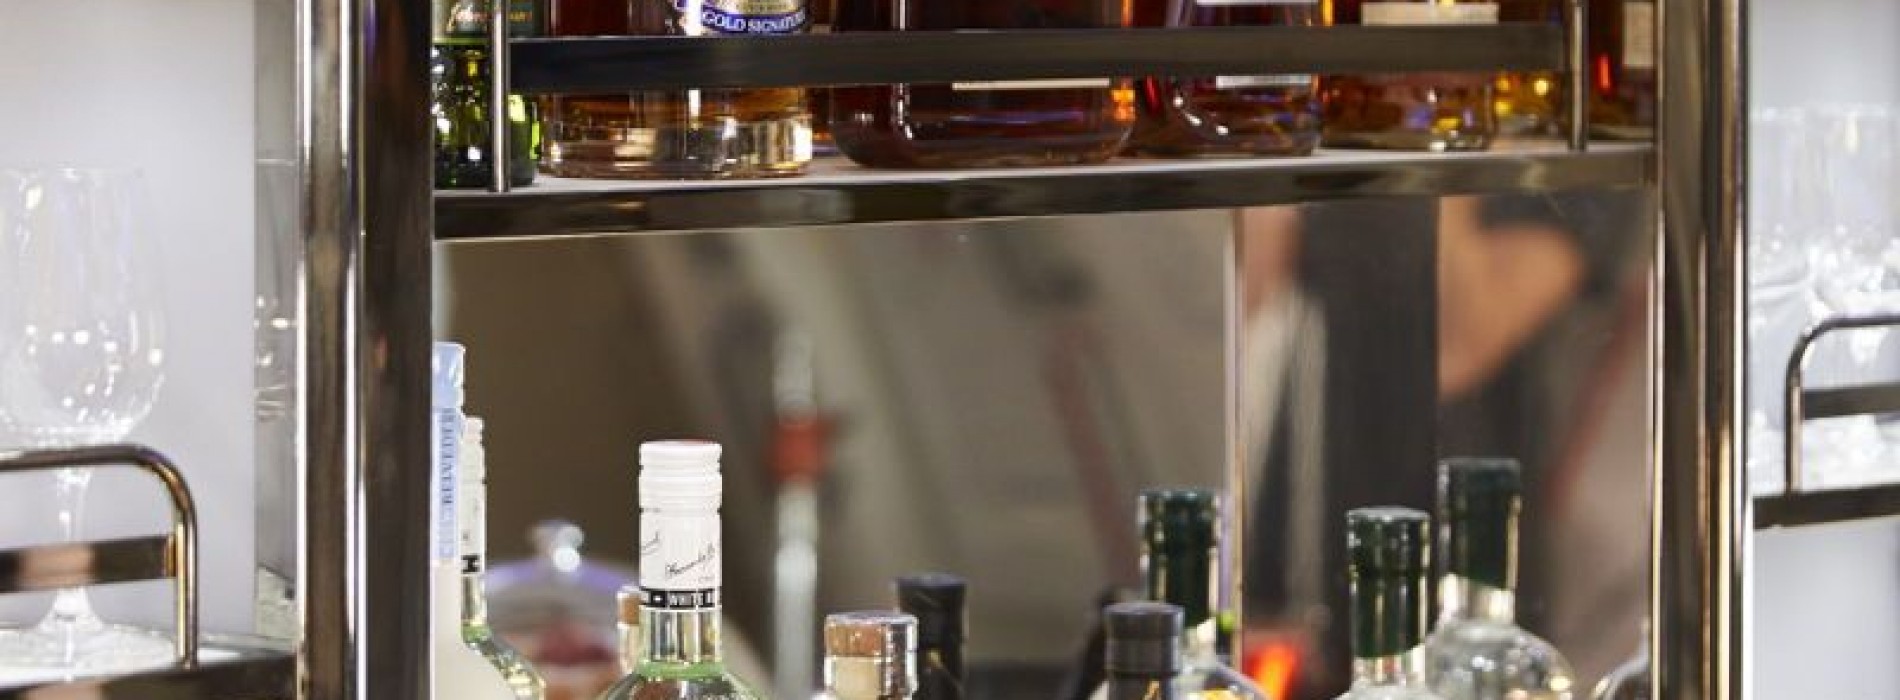 Emirates revamps its spirits offering